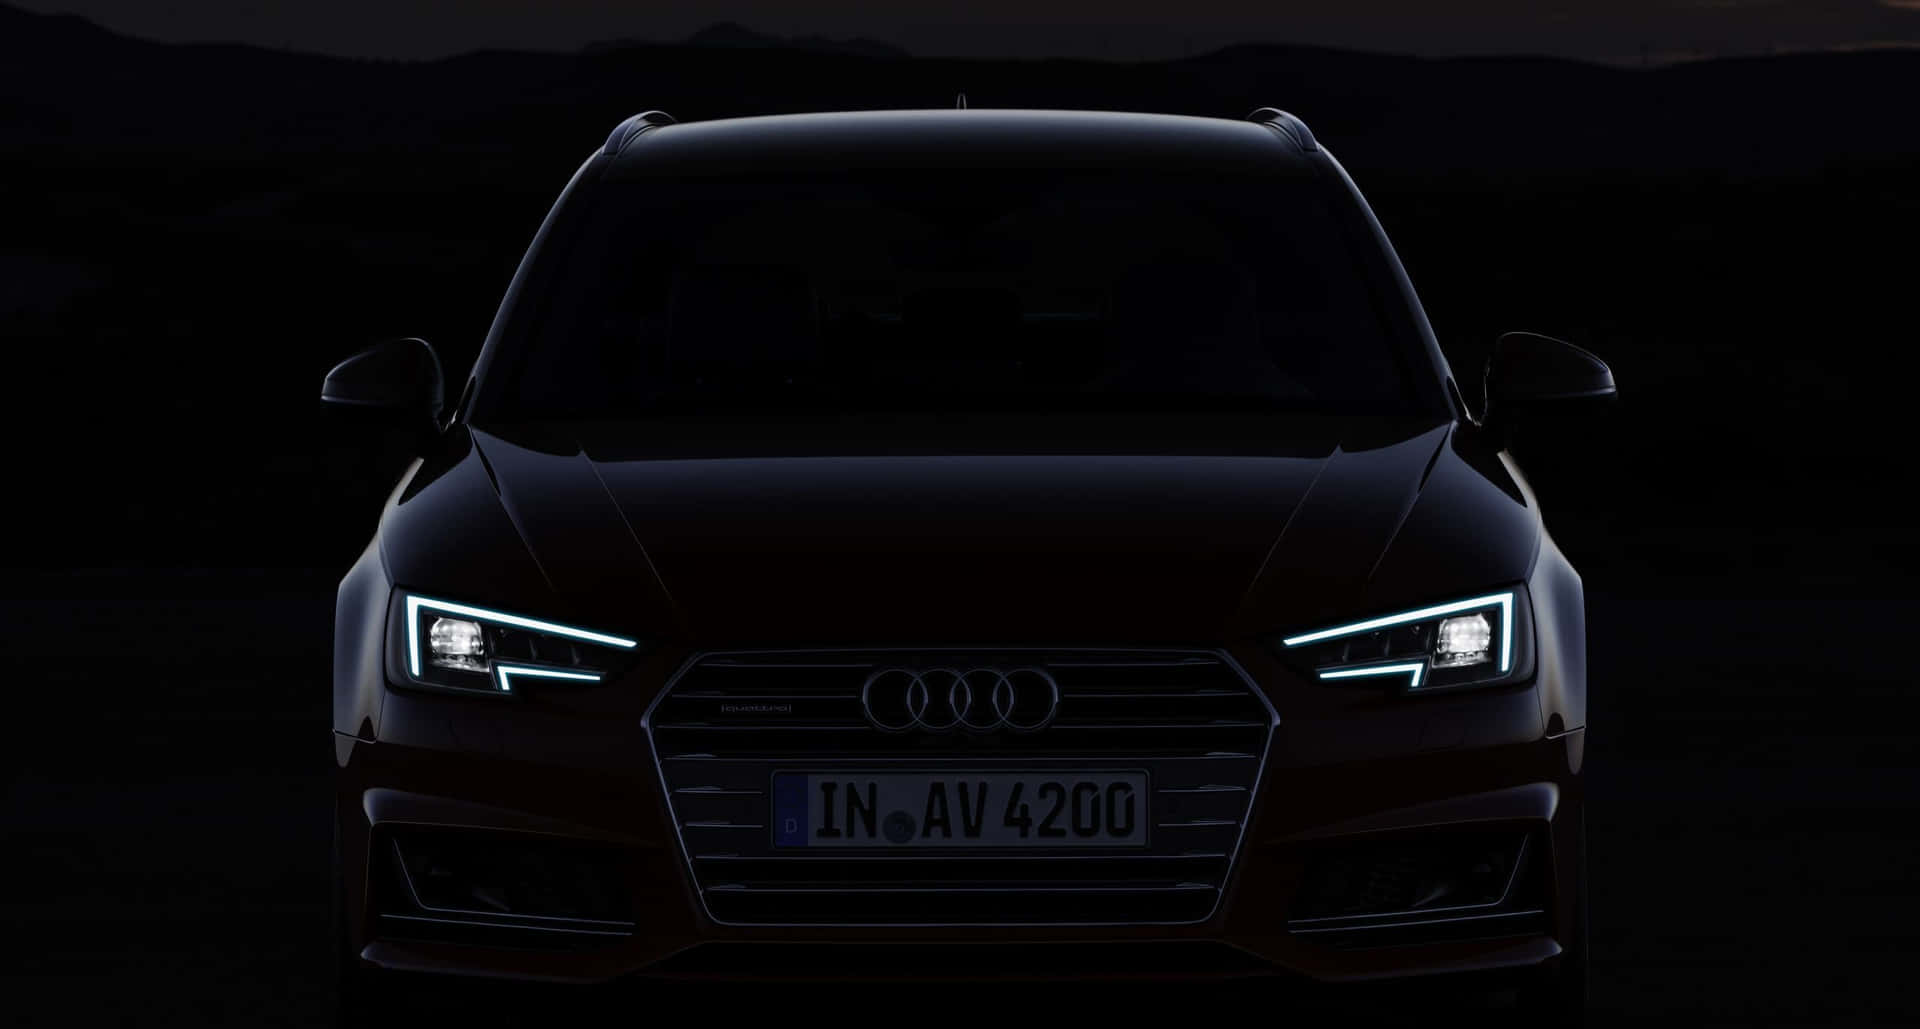 The Stunning Audi A4 in Motion Wallpaper